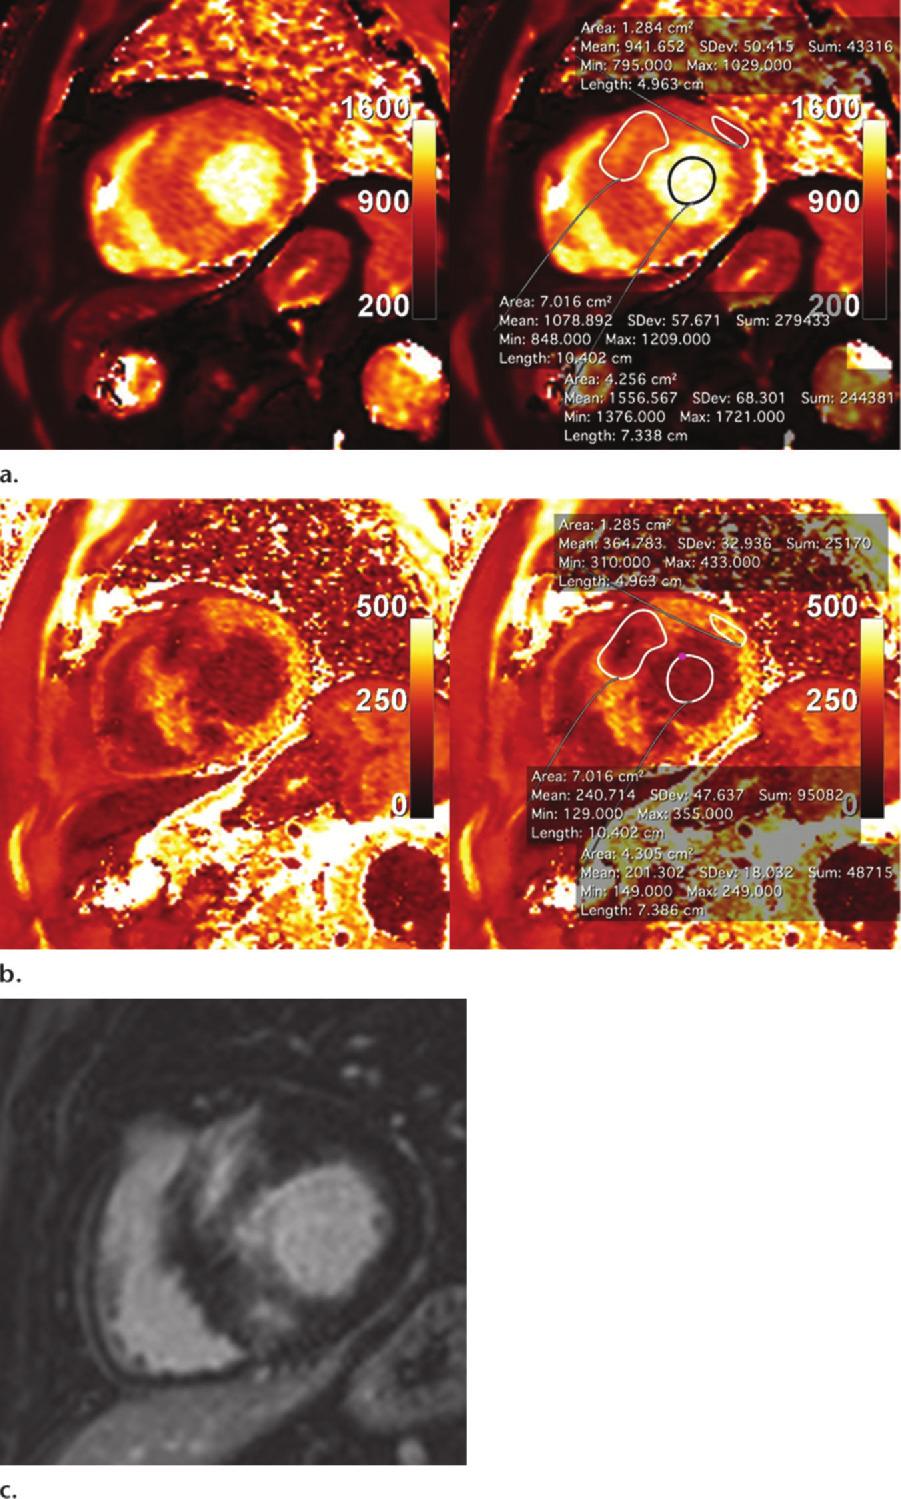 RG Volume 34 Number 6 Hamlin et al 1603 Figure 7. T1 mapping in a 55-year-old man with septal hypertrophic cardiomyopathy. (a) Short-axis nonenhanced MOLLI (1.